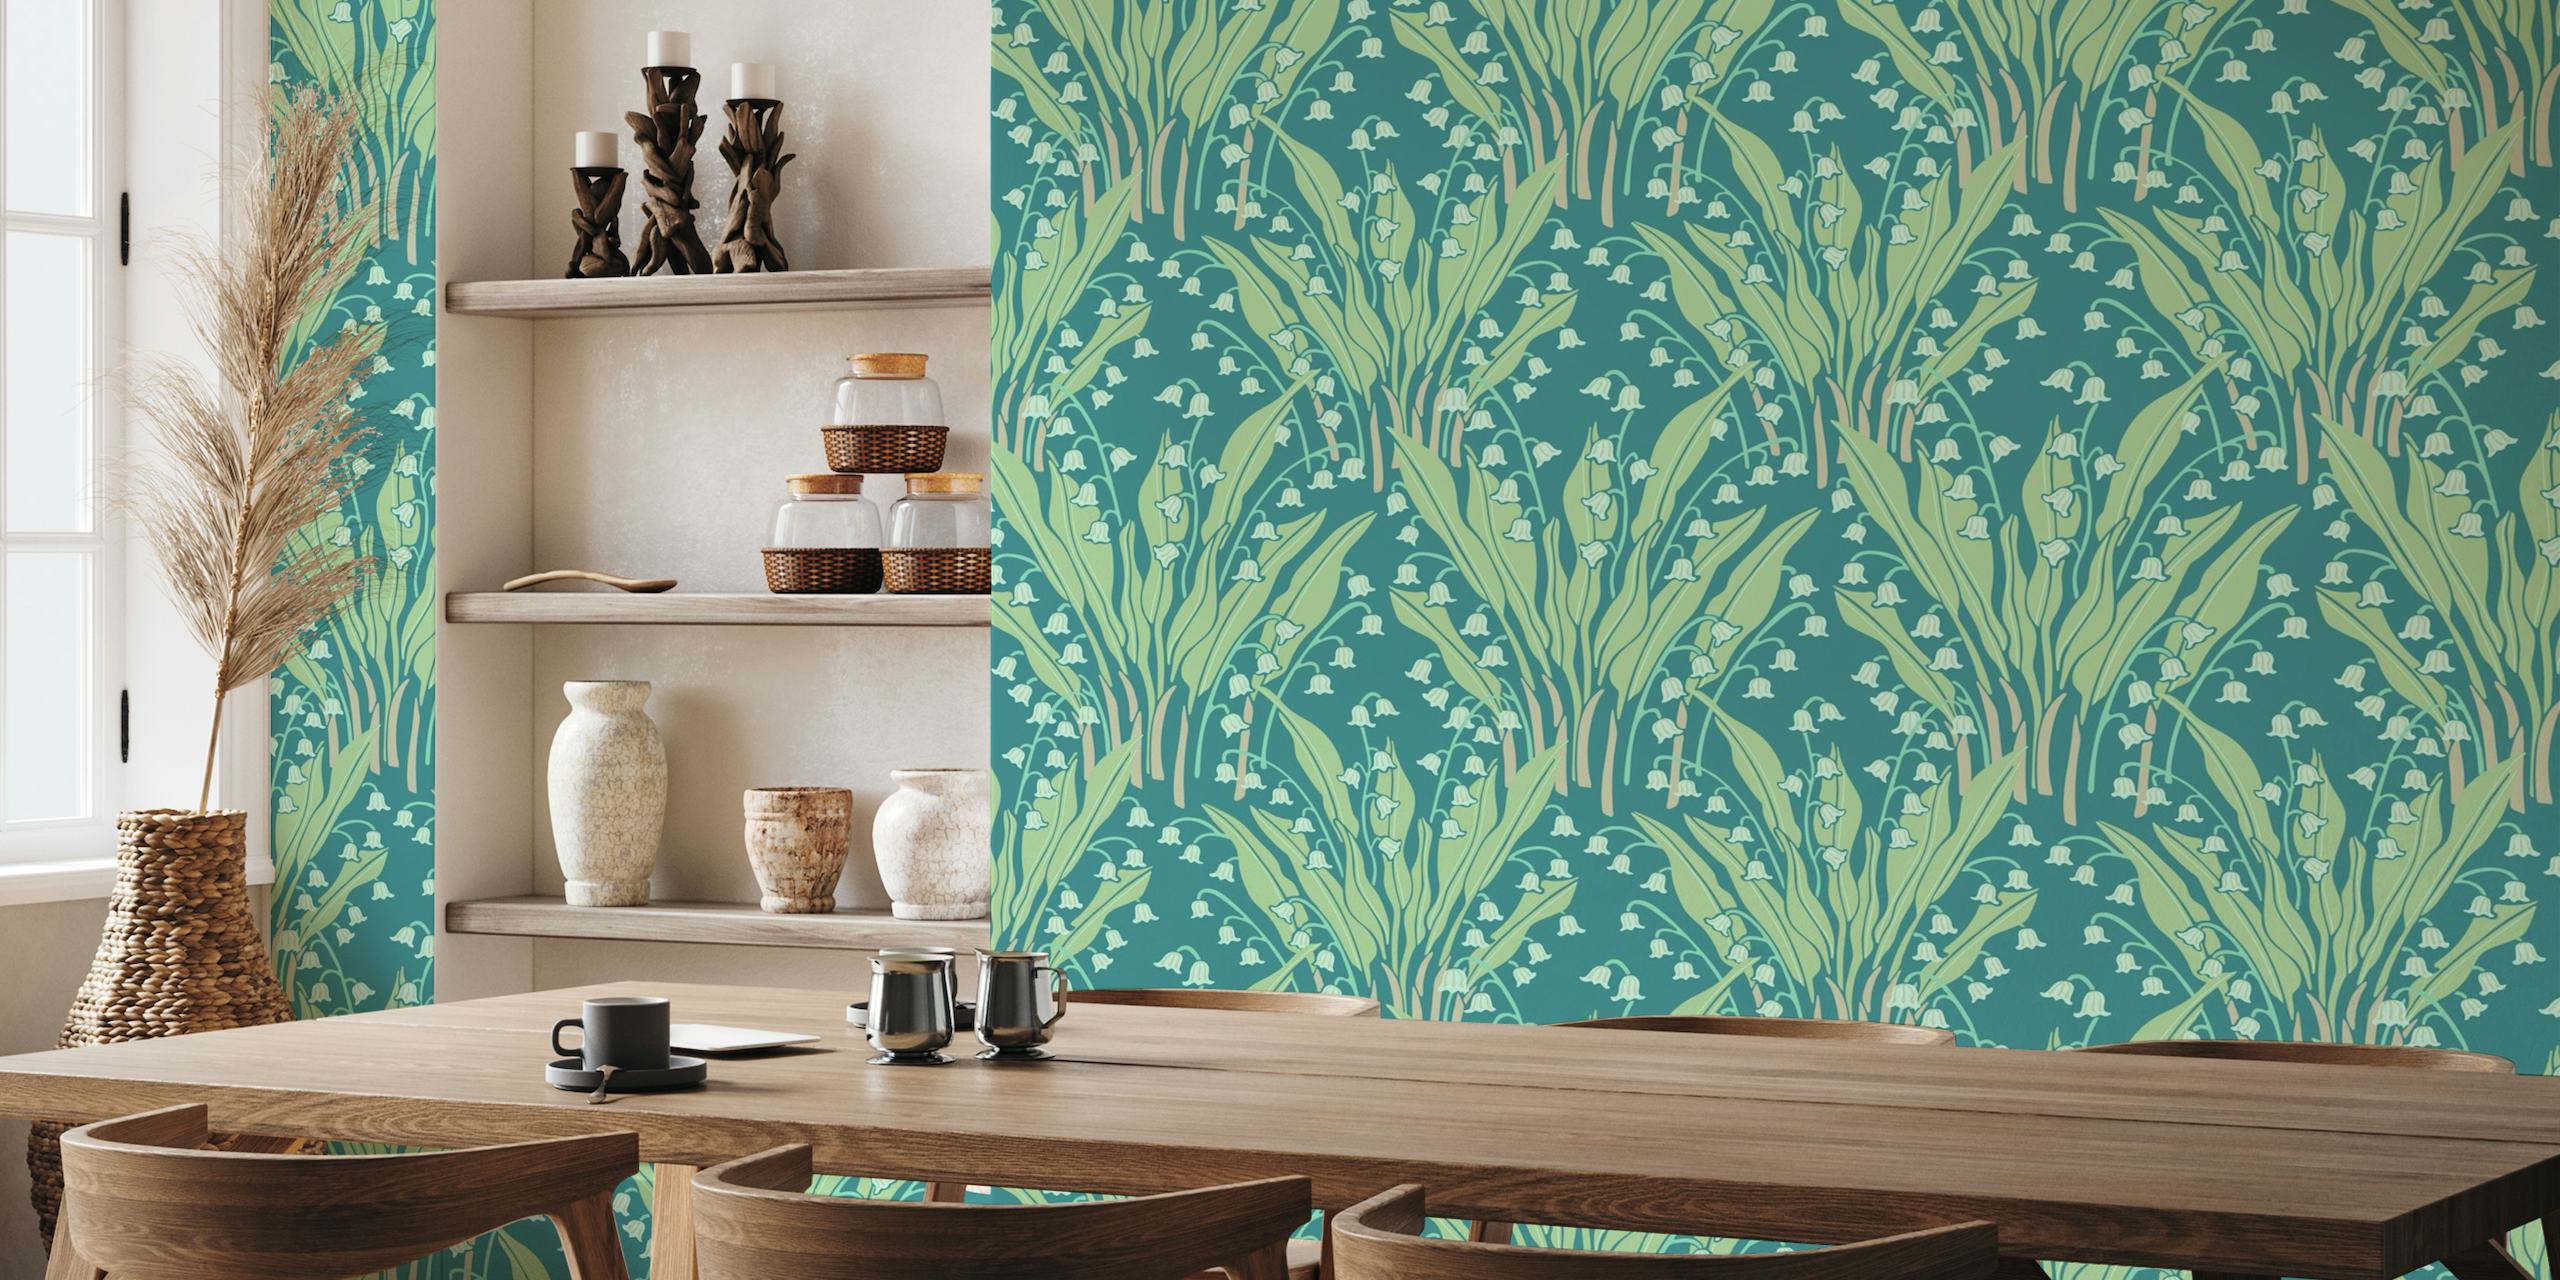 LILY OF THE VALLEY Floral - Teal papel pintado